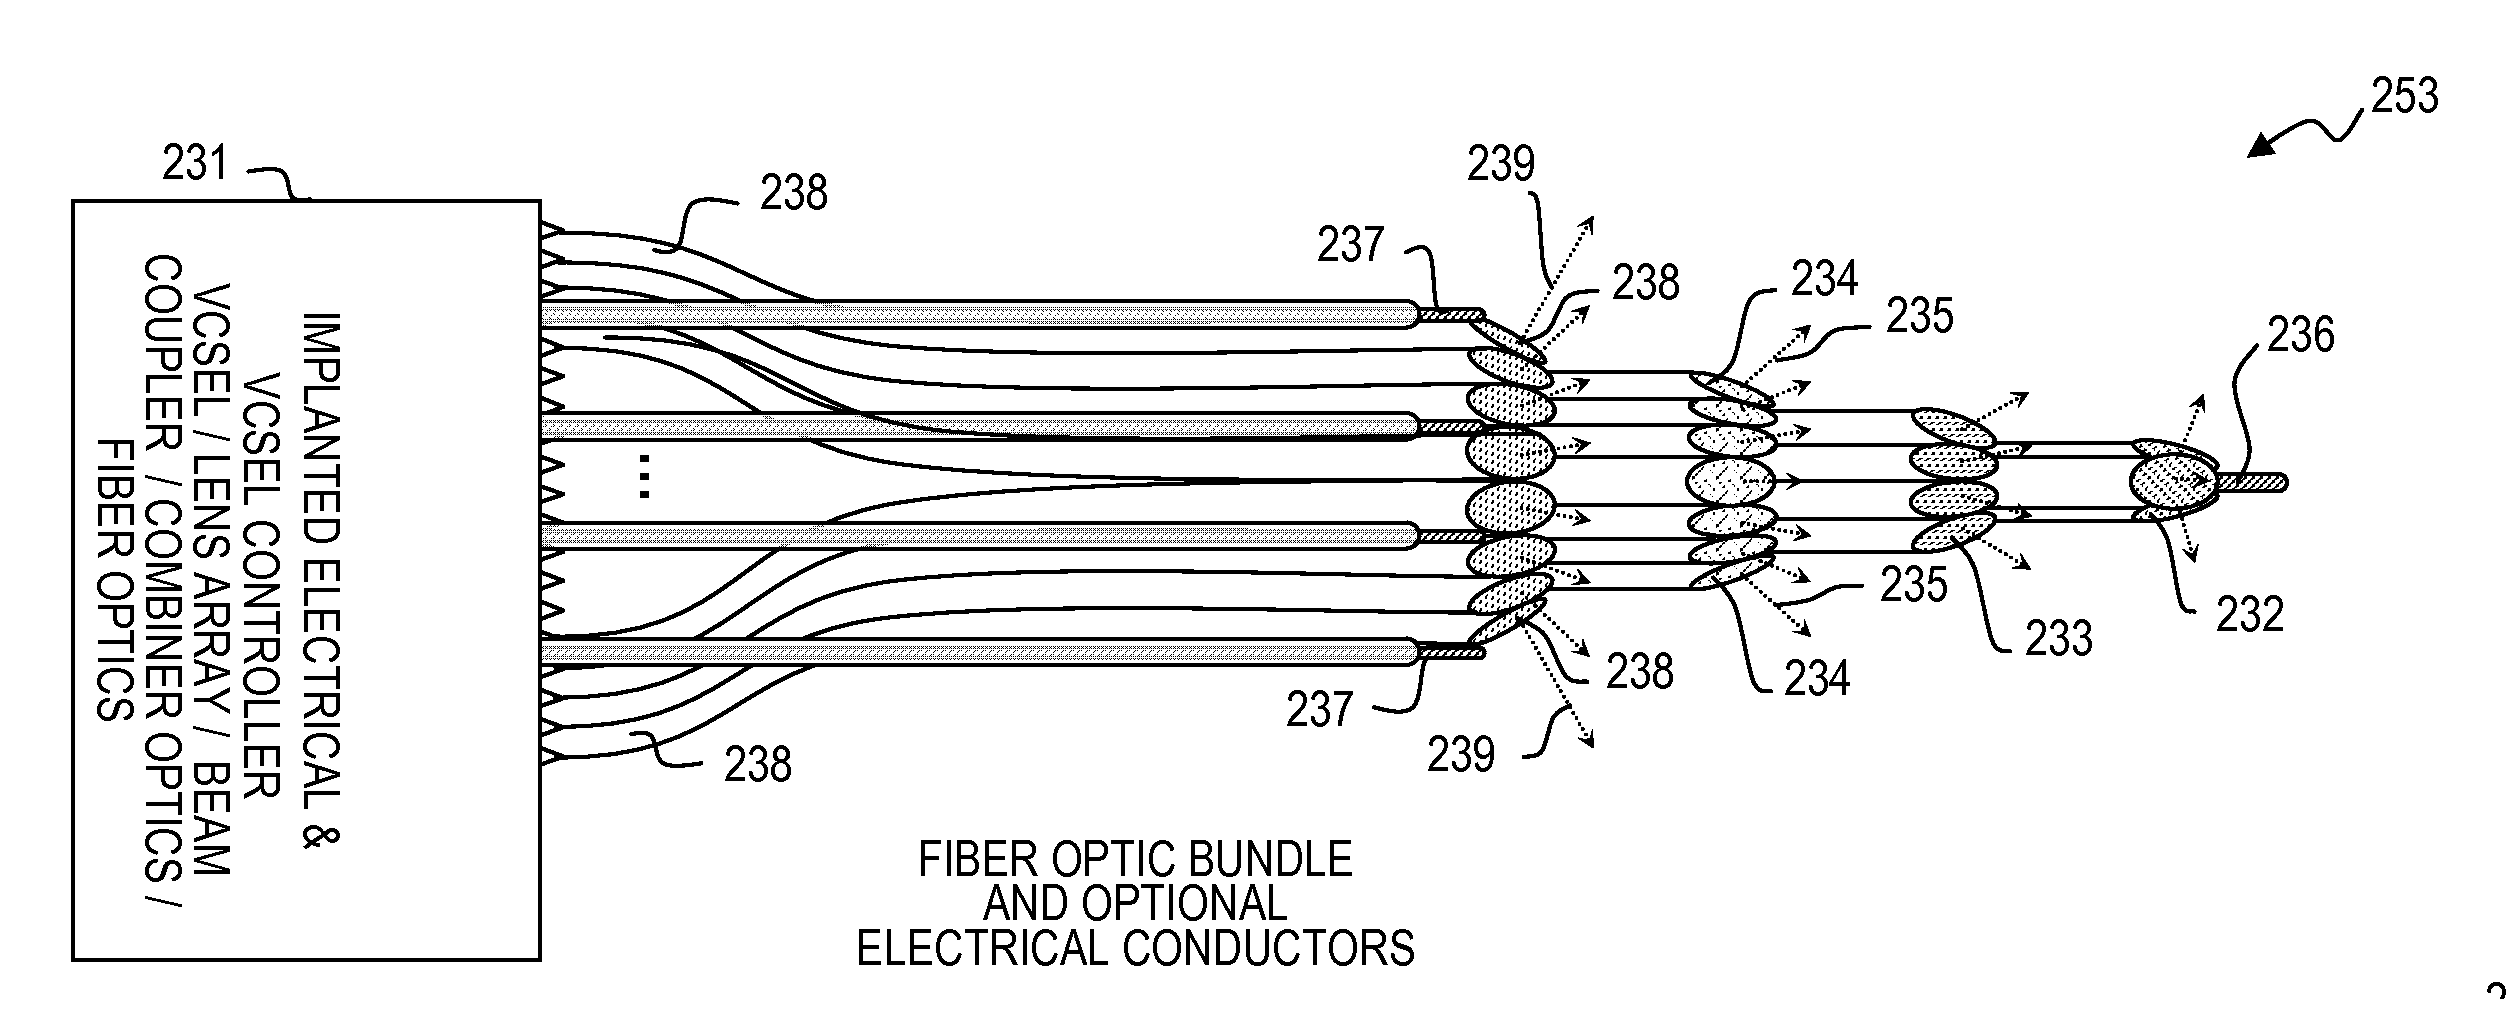 Cuff apparatus and method for optical and/or electrical nerve stimulation of peripheral nerves